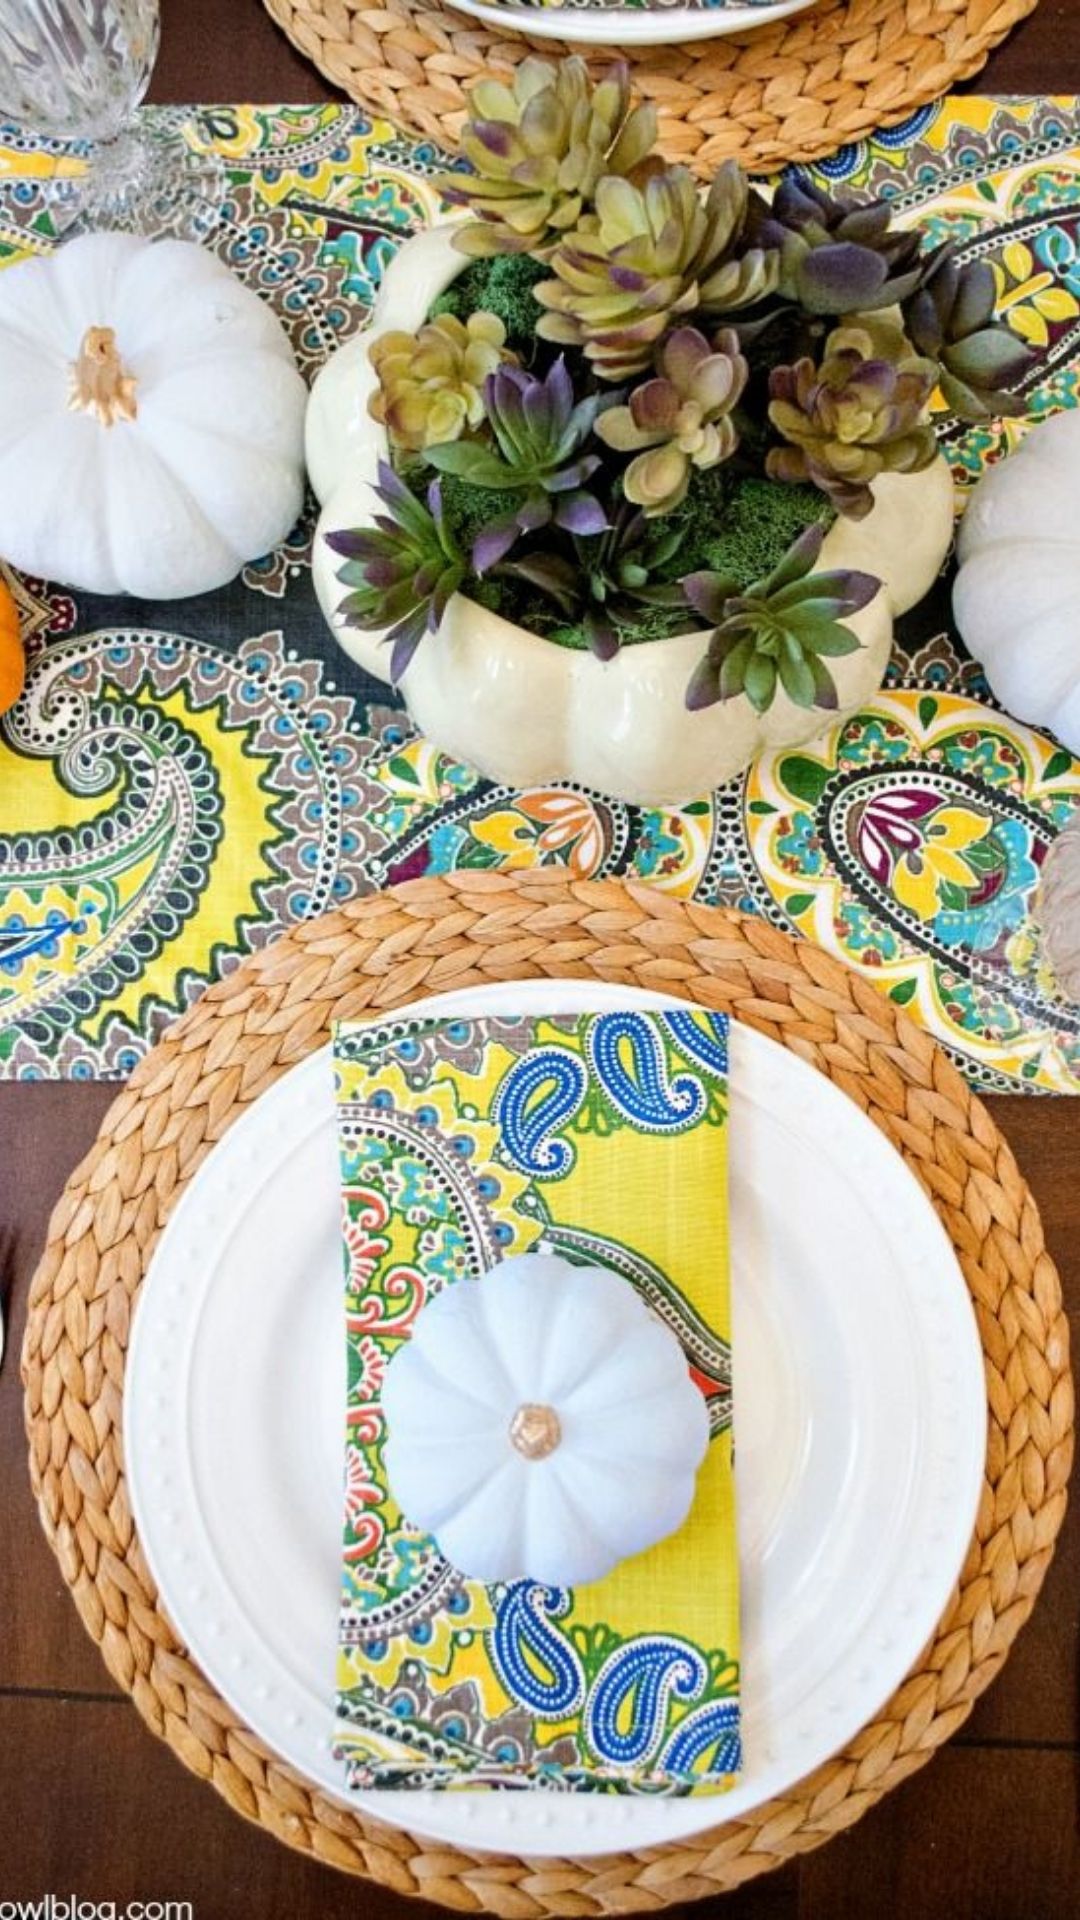 Creative Thanksgiving table setting and tablescape ideas 2021